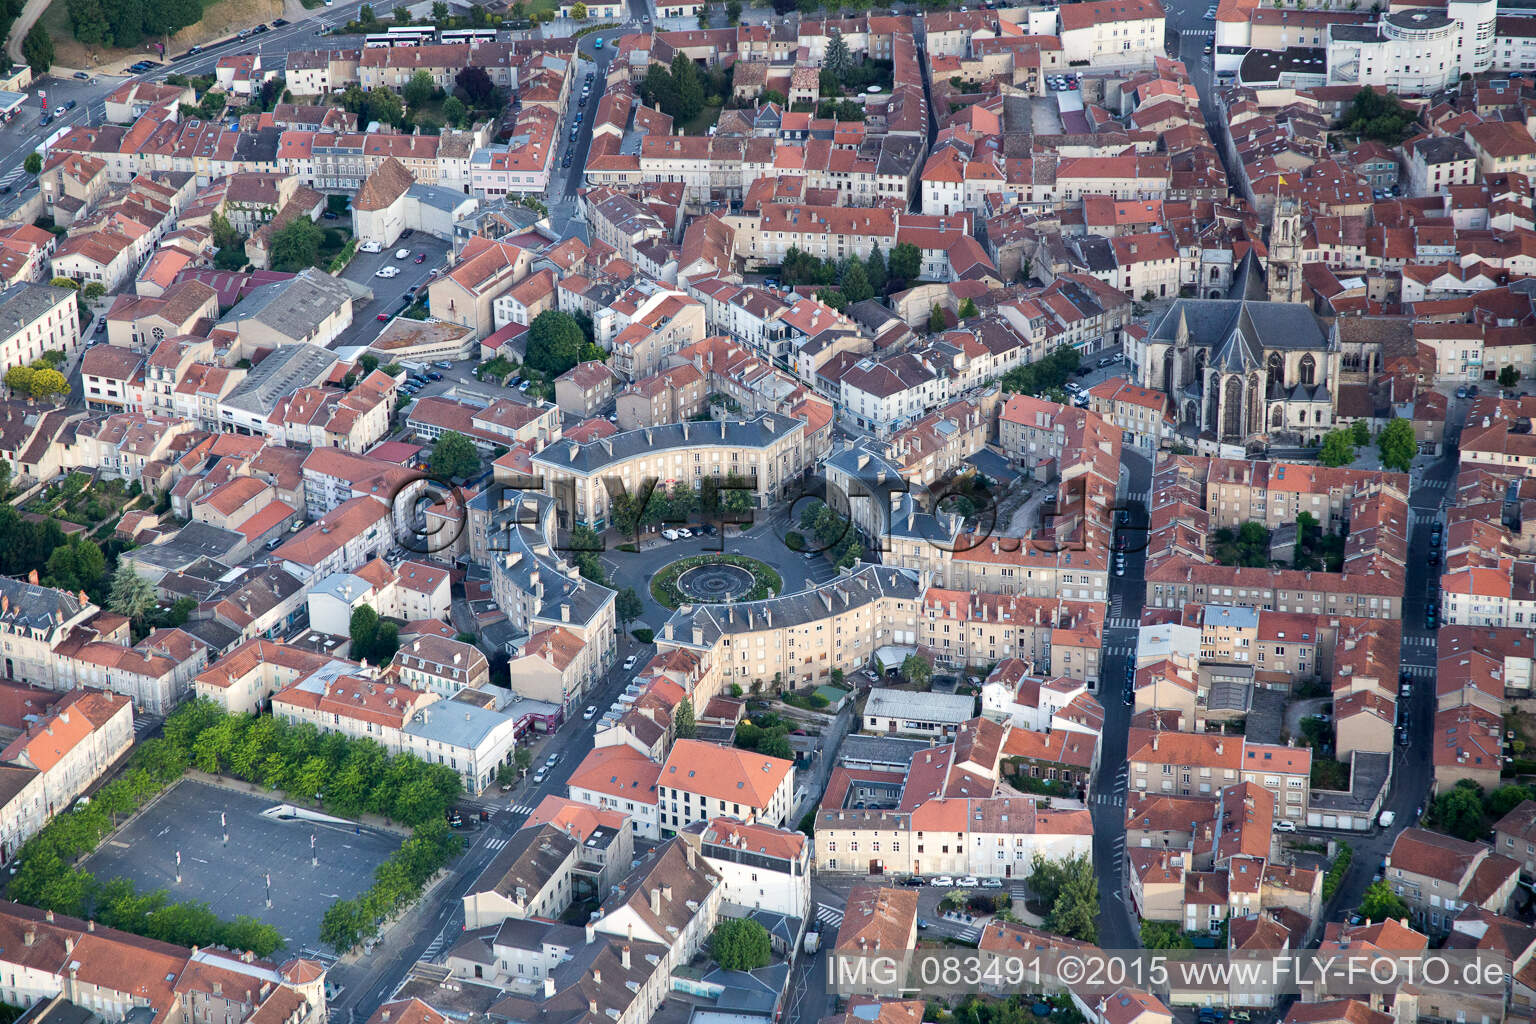 Toul in the state Meurthe et Moselle, France from the drone perspective